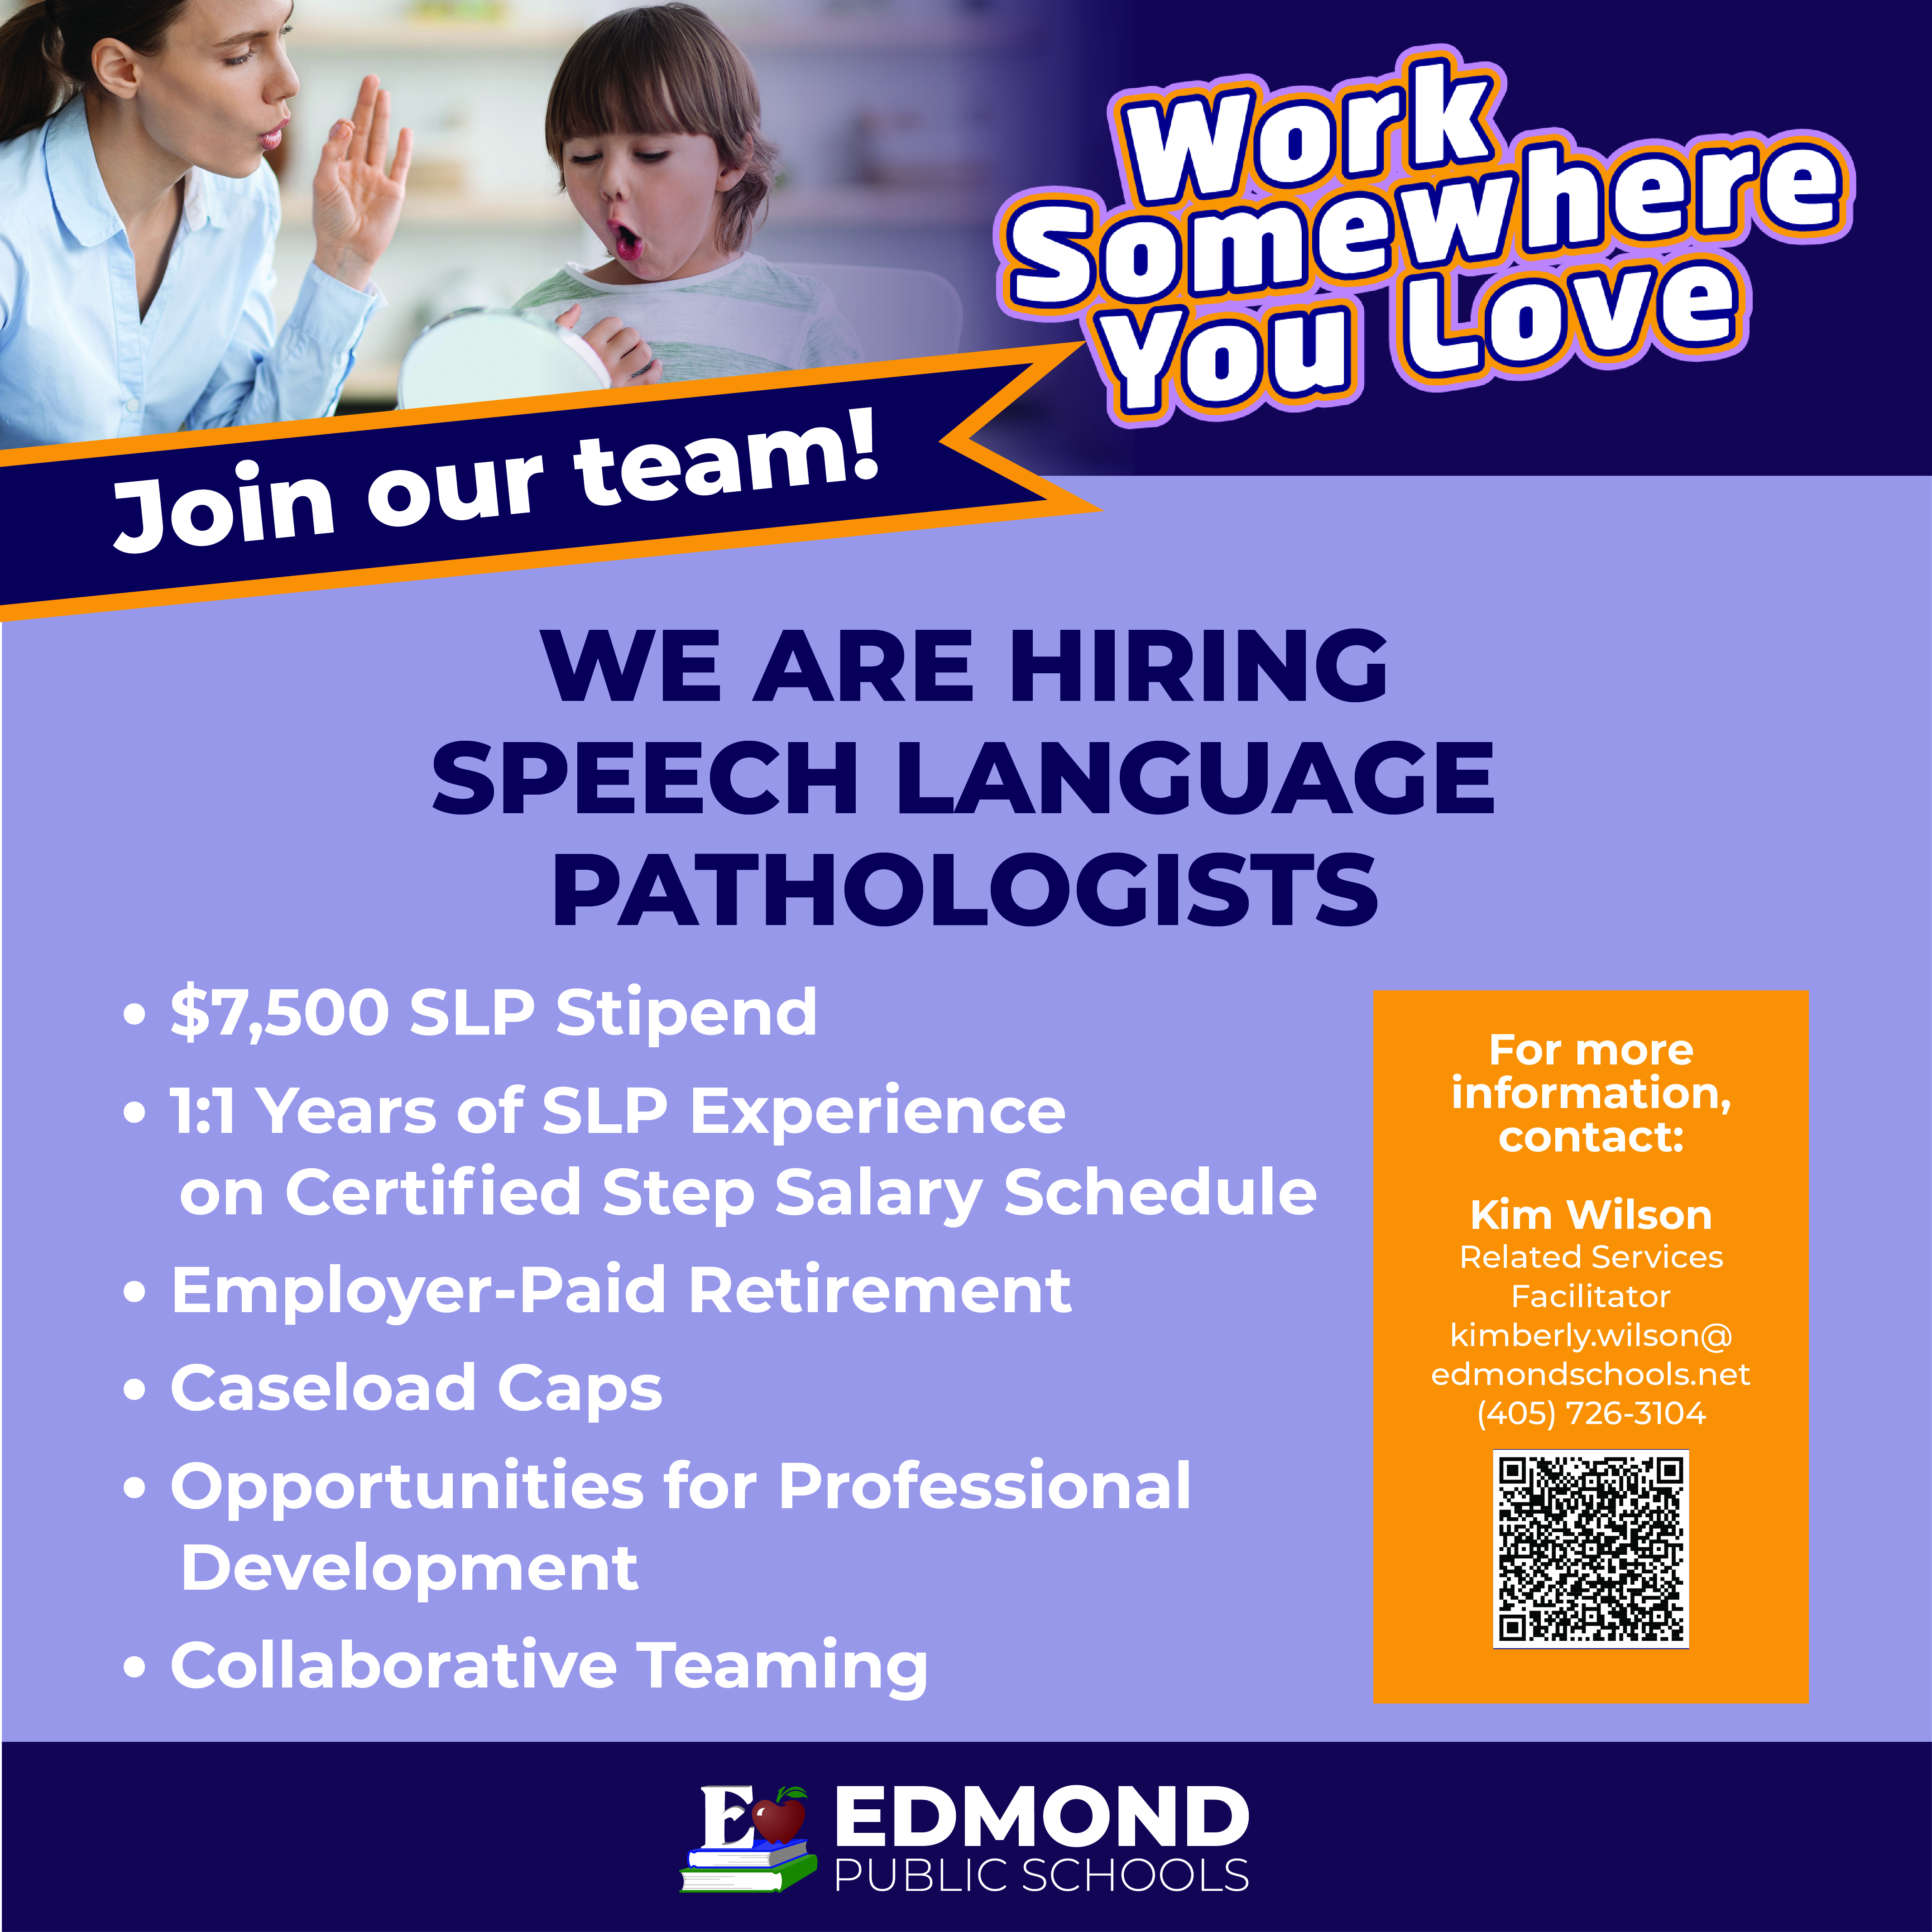 Join our team!  WE ARE HIRING SPEECH LANGUAGE PATHOLOGISTS  • $7,500 SLP Stipend • 1:1 Years of SLP Experience on Certified Step Salary Schedule • Employer-Paid Retirement • Caseload Caps • Opportunities for Professional Development • Collaborative Teaming For more information, contact:  Kim Wilson Related Services Facilitator kimberly.wilson@ edmondschools.net (405) 726-3104